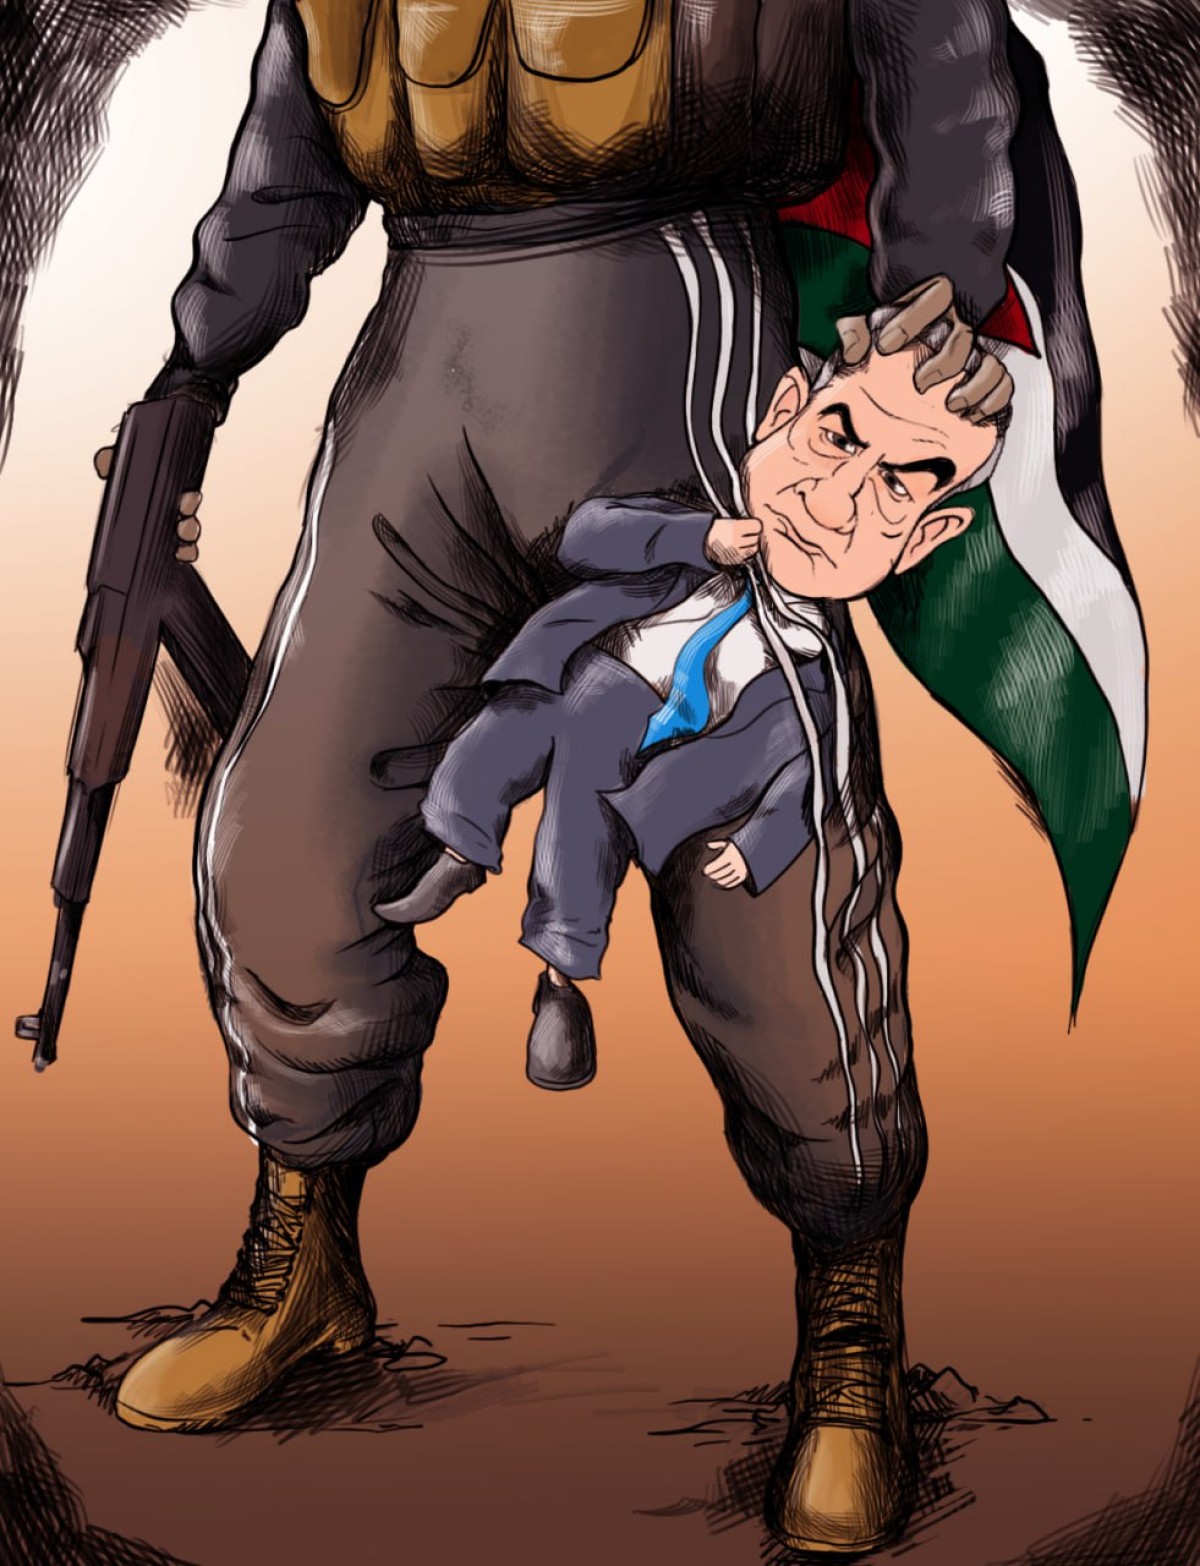 Netanyahu against the Palestinian fighter